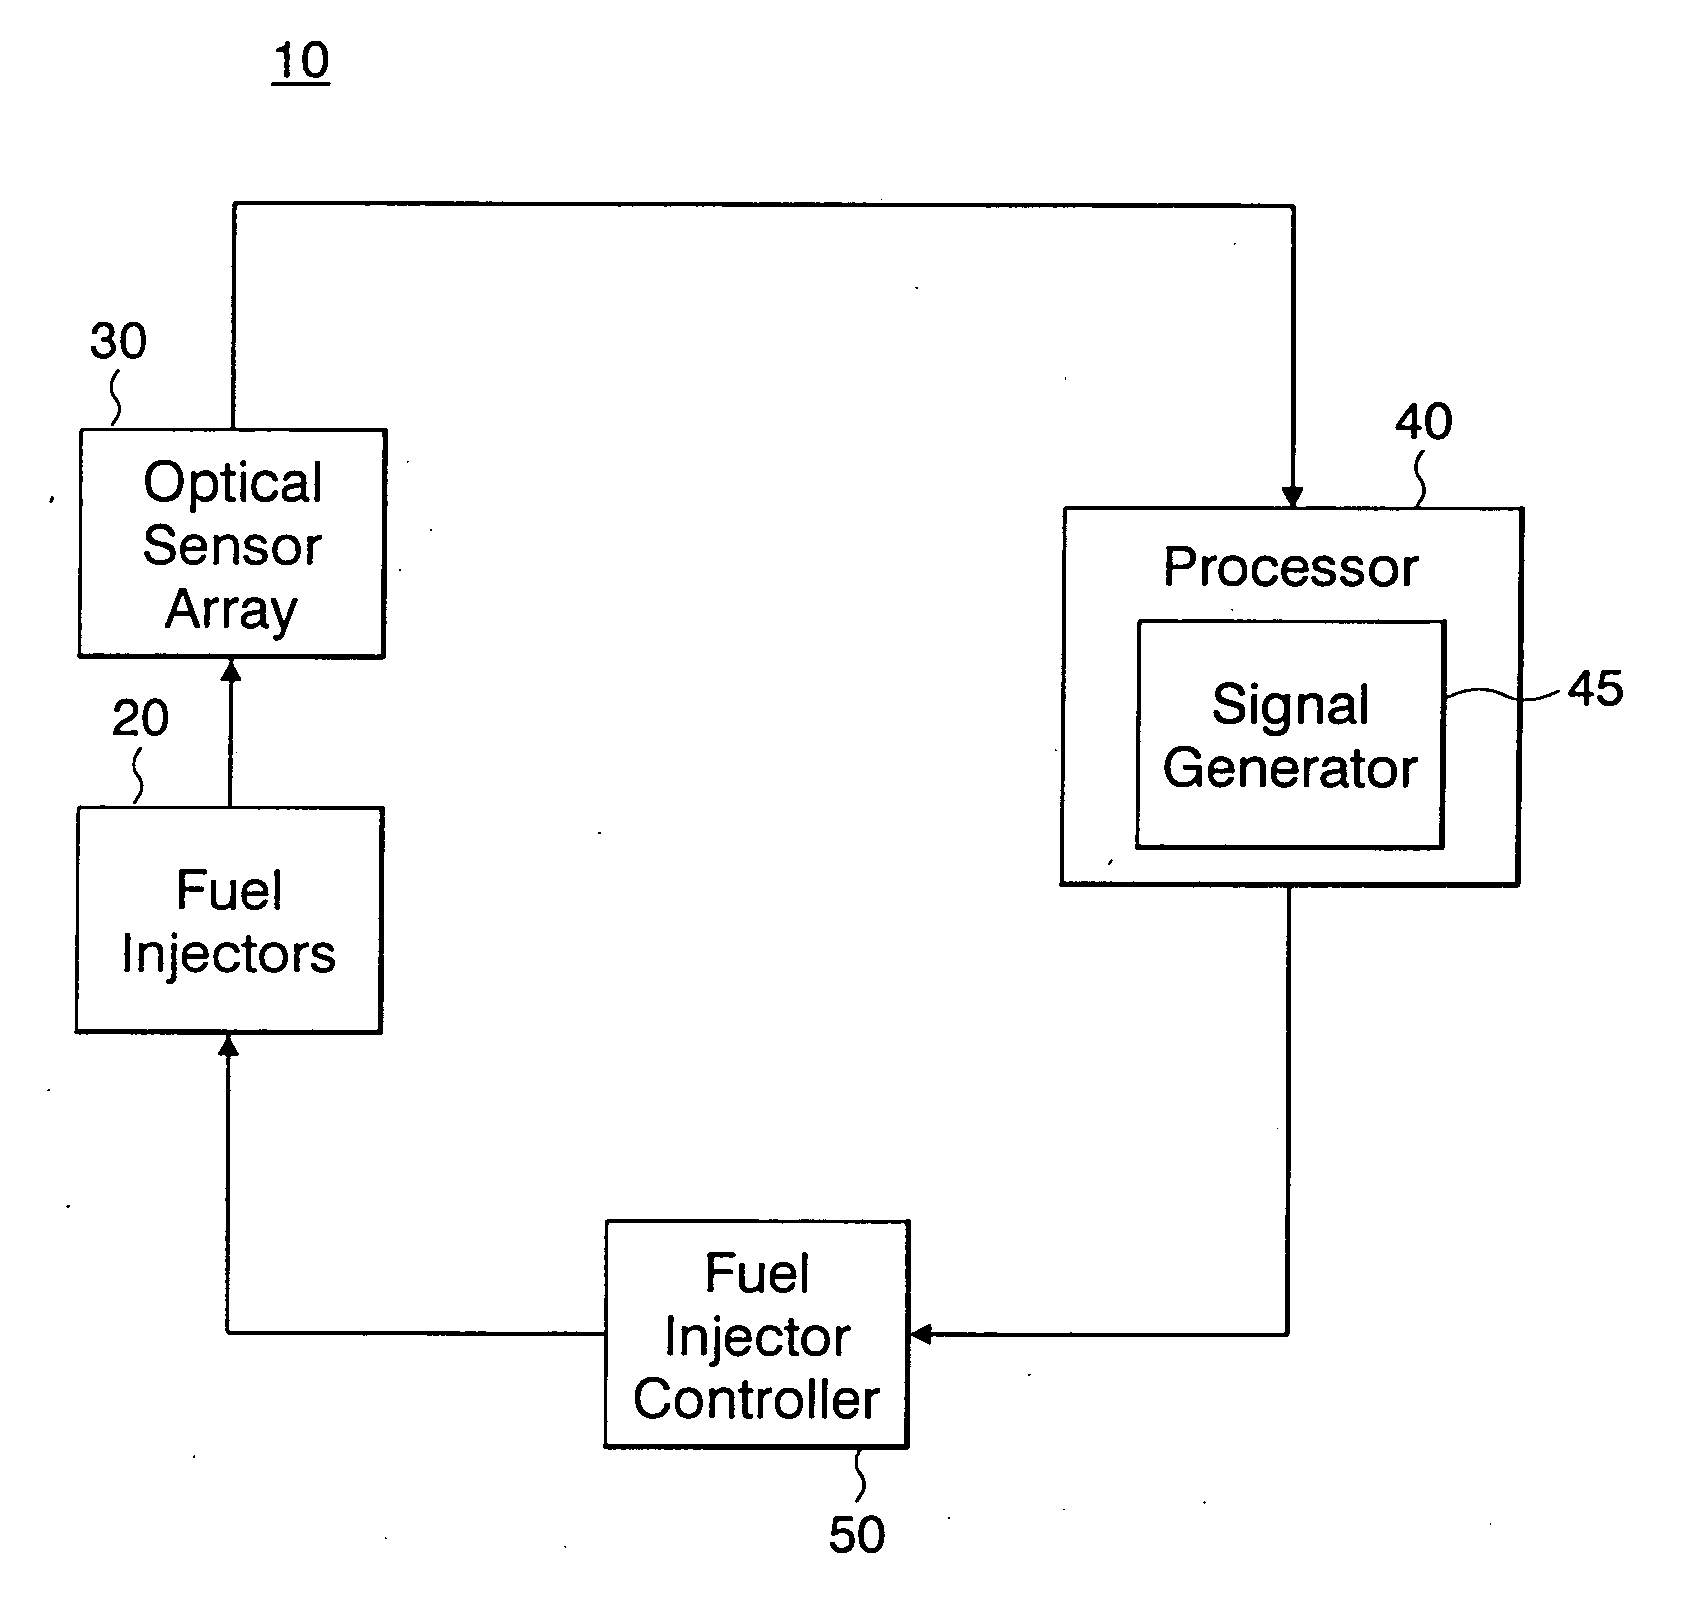 Apparatus, system and method for observing combustion conditions in a gas turbine engine